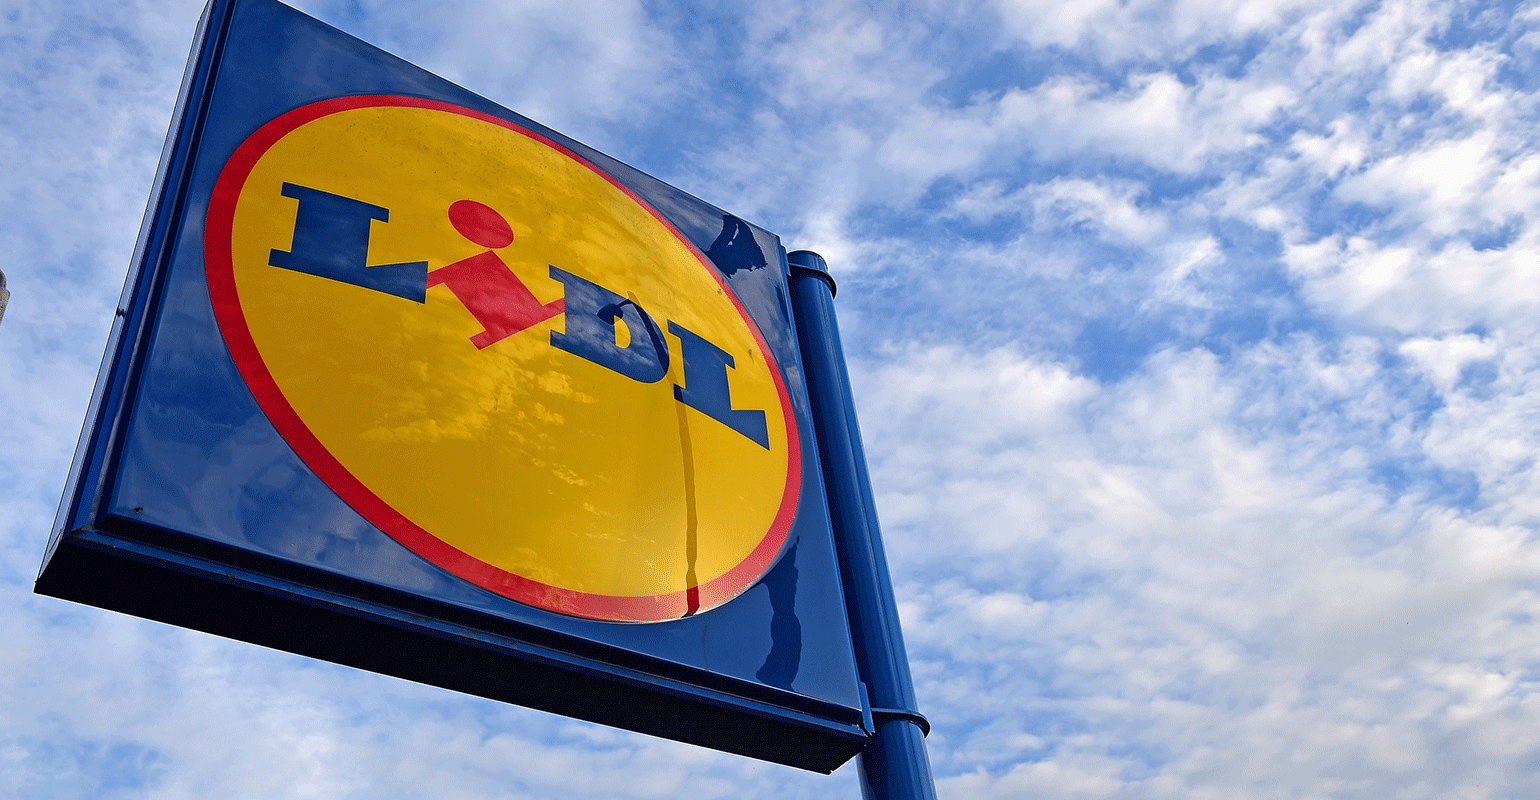 Lidl First U.S. stores opening June 15 Supermarket News